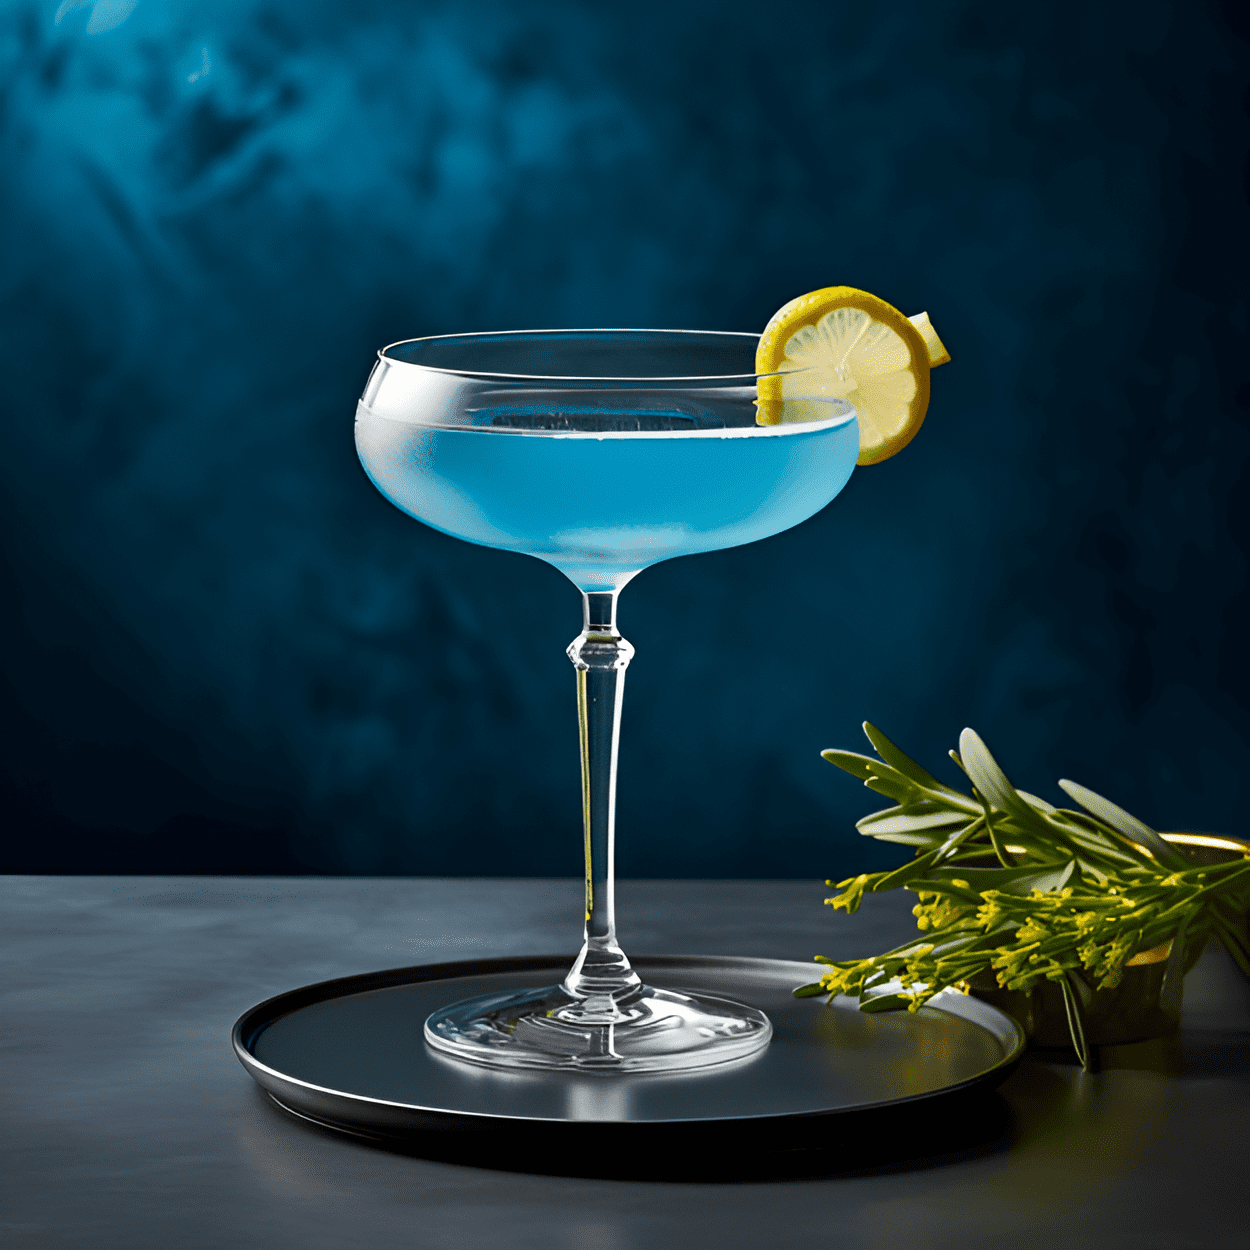 Bombay Sapphire Cocktail Recipe - The Bombay Sapphire cocktail is a harmonious blend of flavors, offering a refreshing, crisp, and slightly sweet taste. The botanicals in the gin provide a subtle, yet complex, herbal and citrus undertone, while the additional ingredients add a touch of sweetness and a hint of tartness.